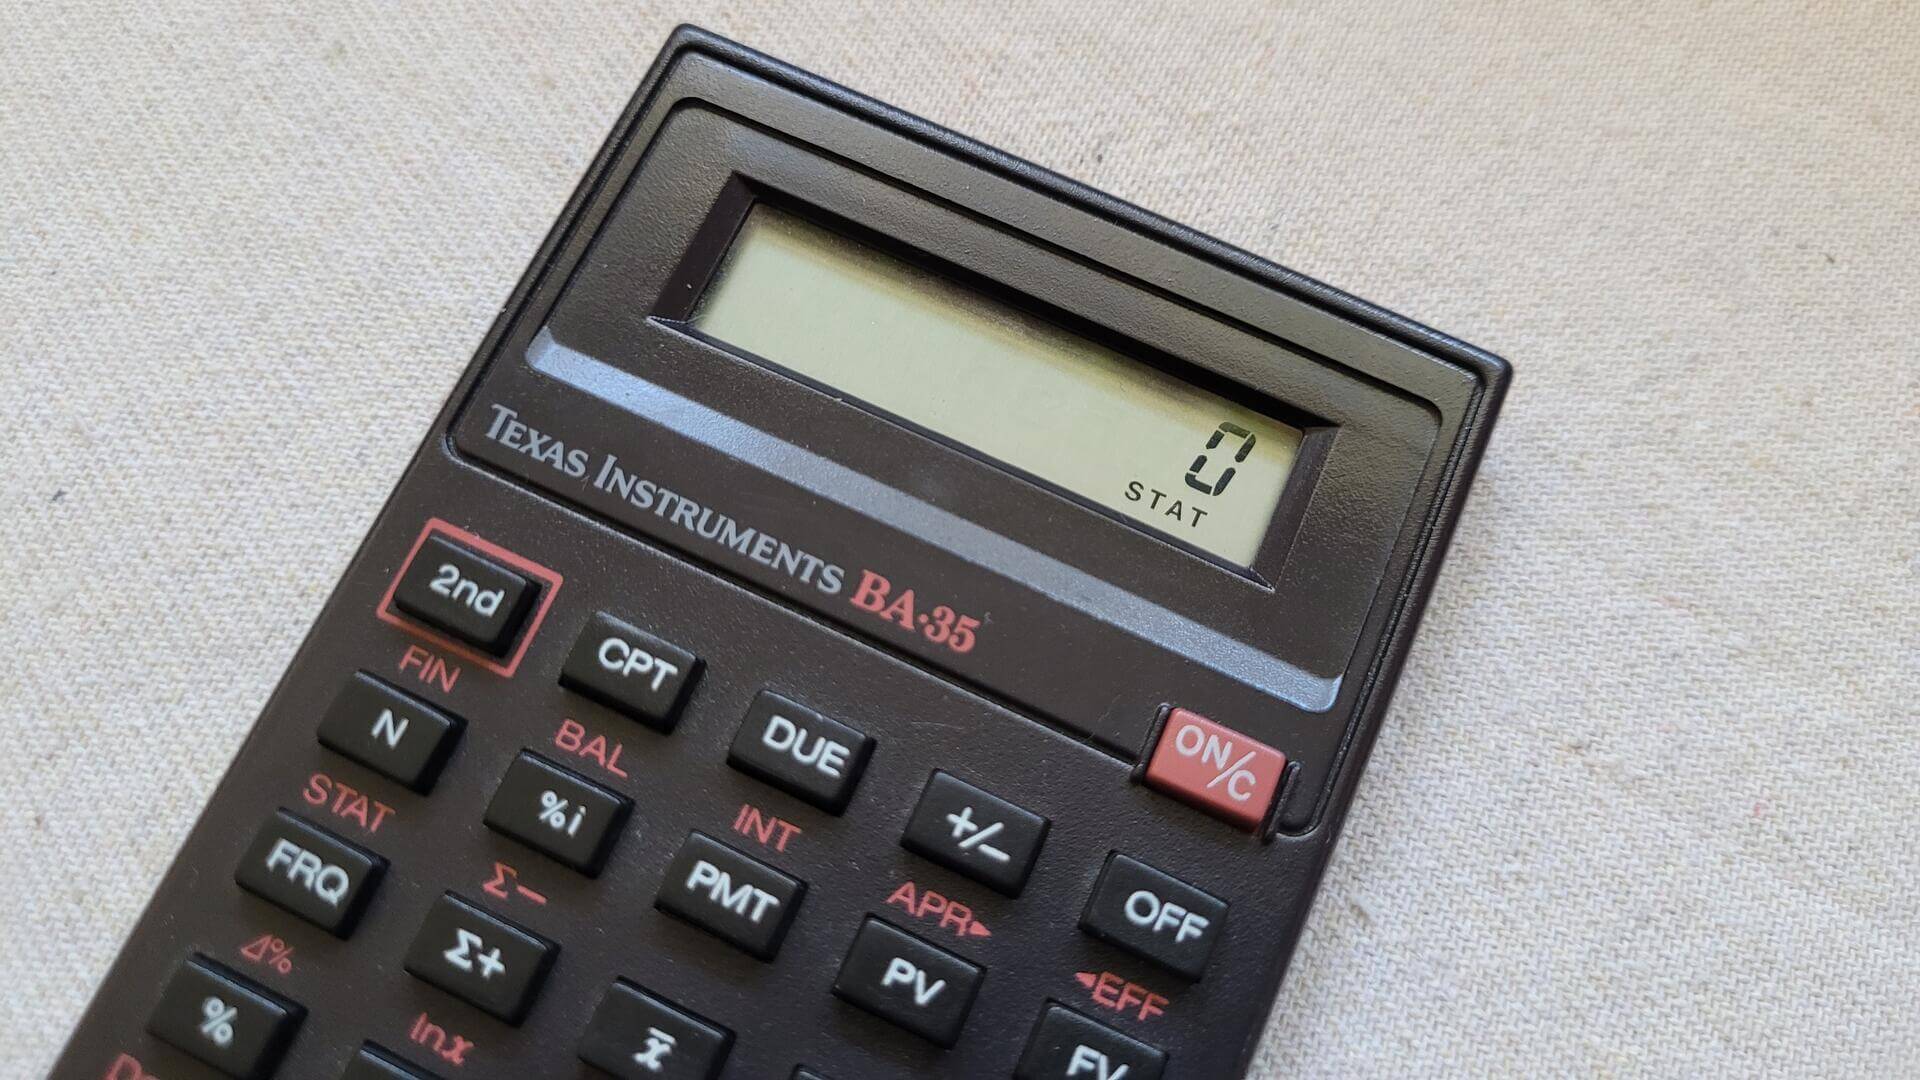 texas-instruments-ba-35-business-analyst-calculator-made-in-italy-1980s-vintage-retro-electronics-business-tools-and-gadgets-screen-view